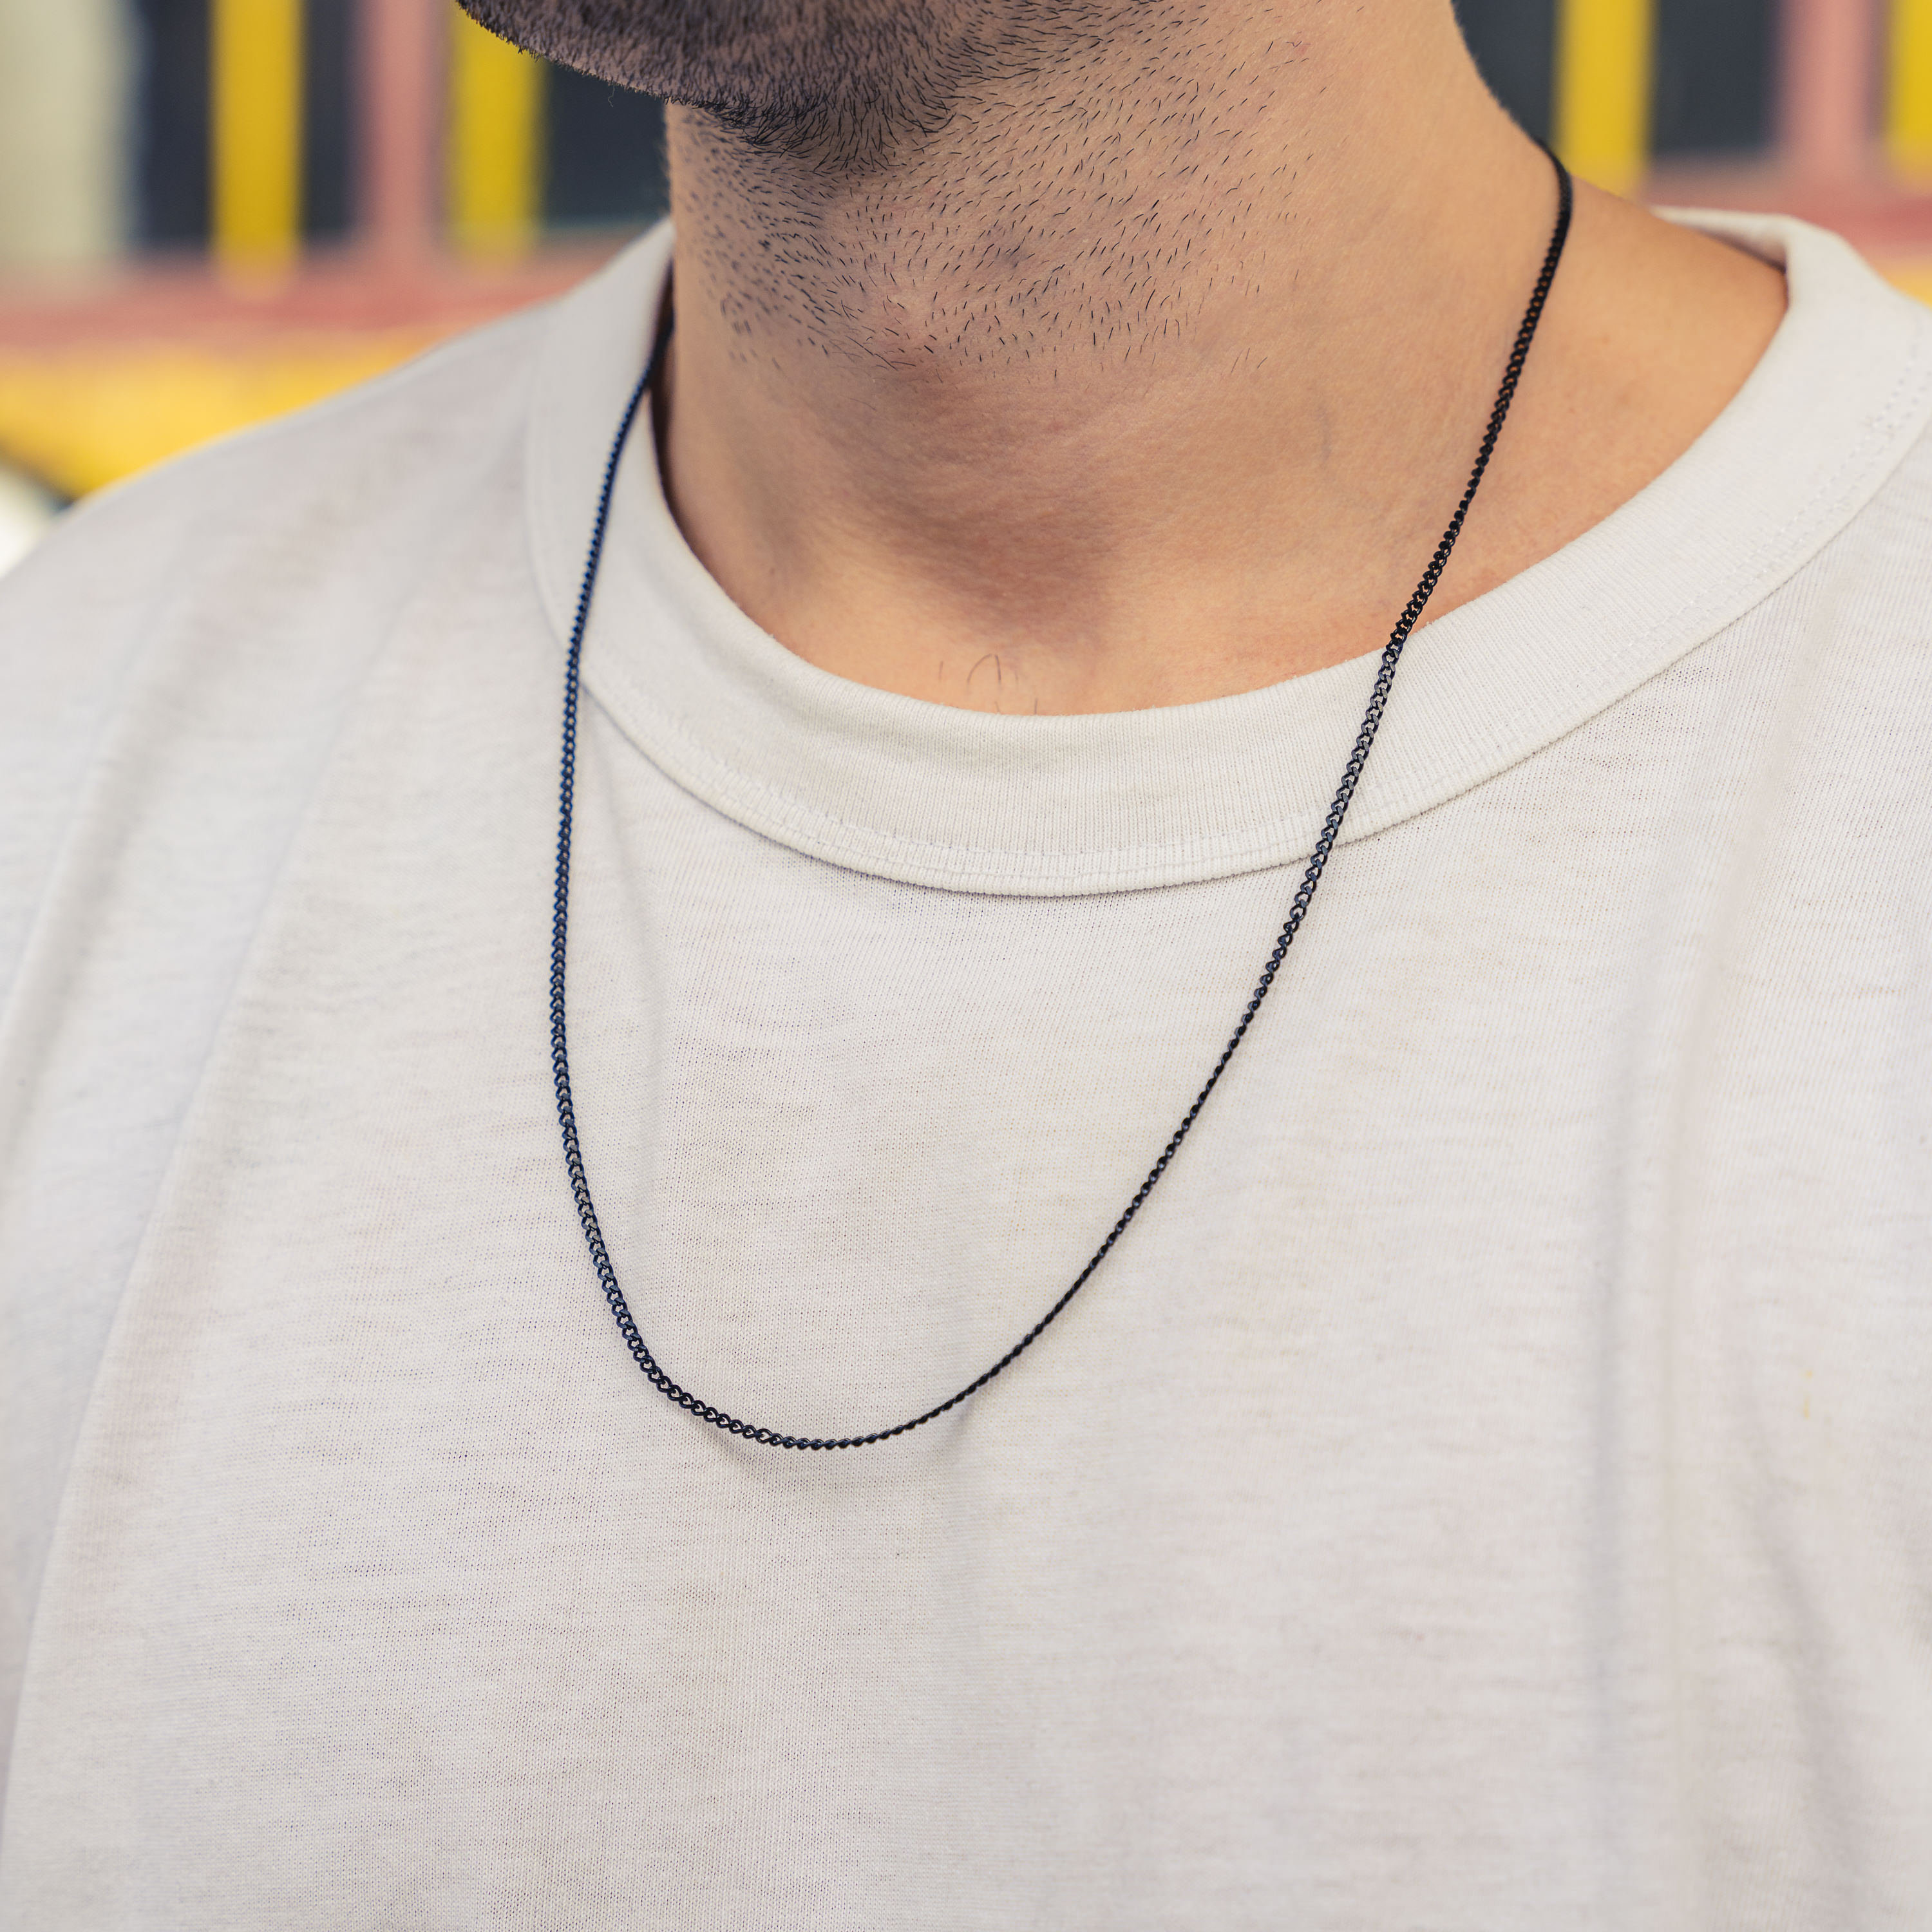 FASHION NEW BLACK RECTANGLE PENDANT NECKLACE MEN COLLAR TREANDY SIMPLE  STAINLESS STEEL CHAIN MEN NECKLACE JEWELRY